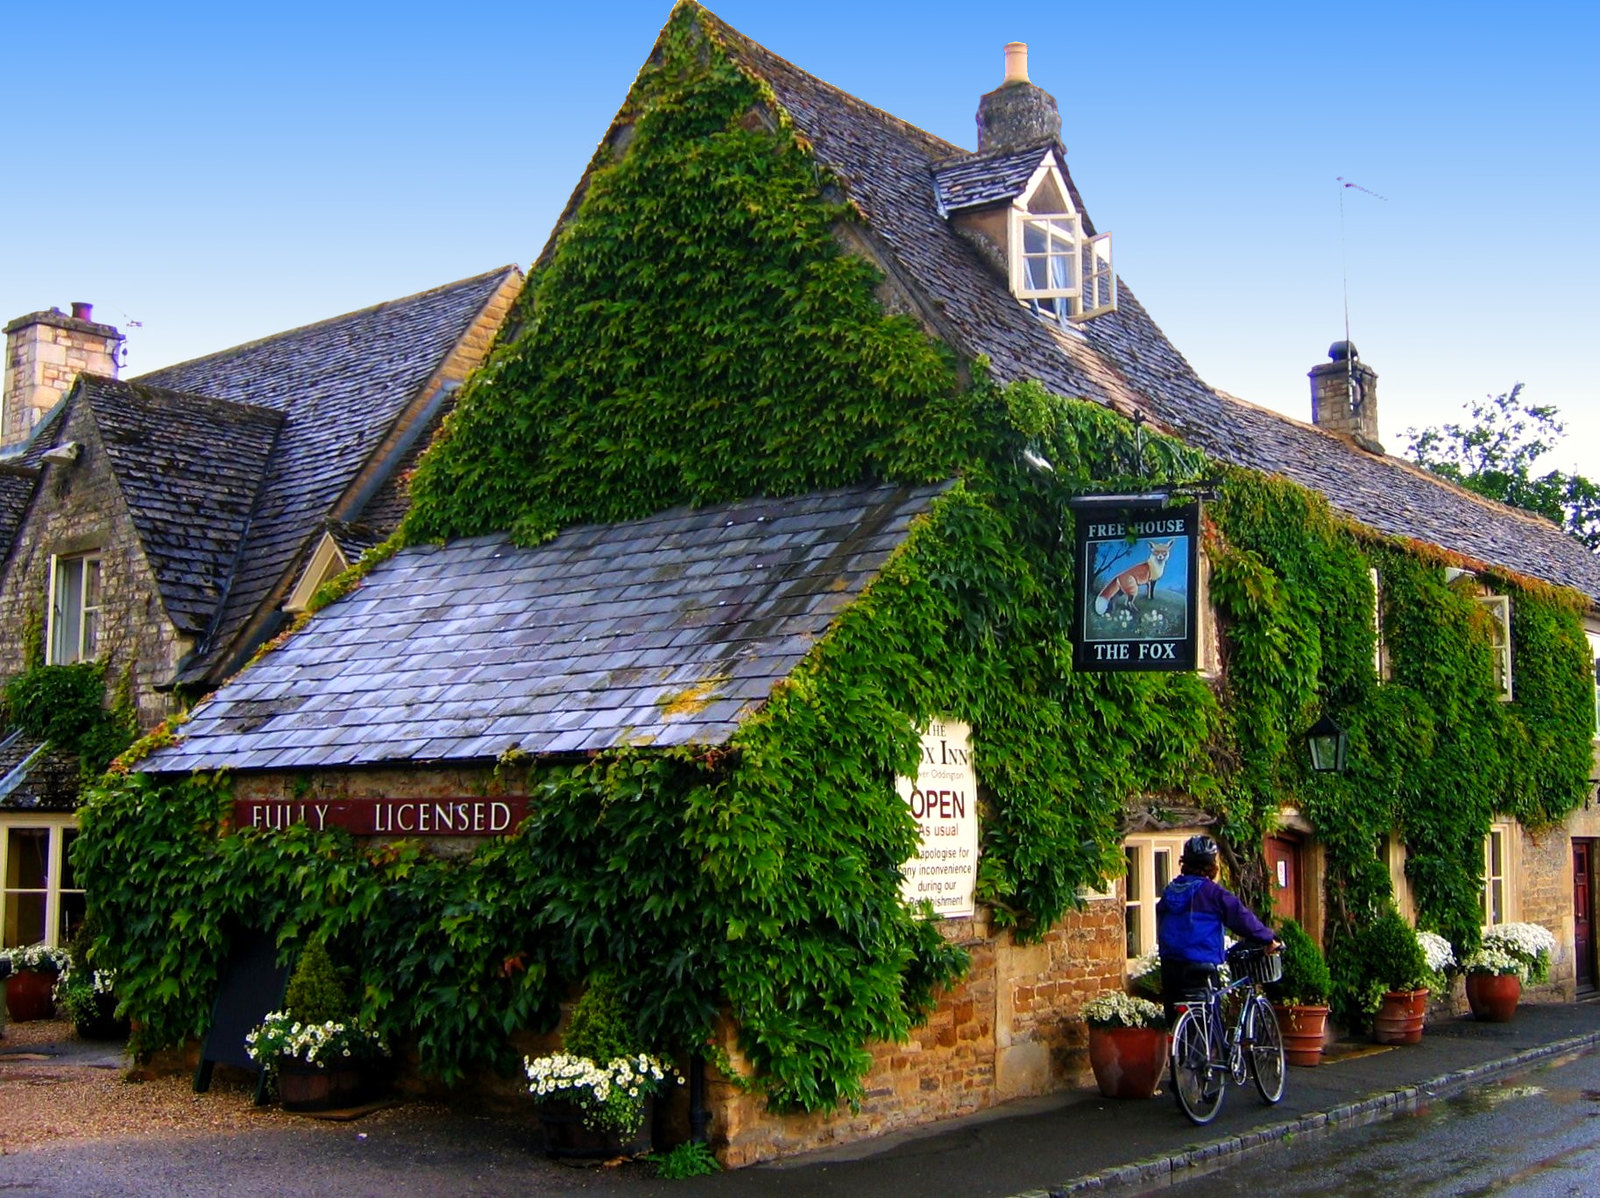 The Fox Inn in Lower Oddington in the Cotswolds. Credit JR P